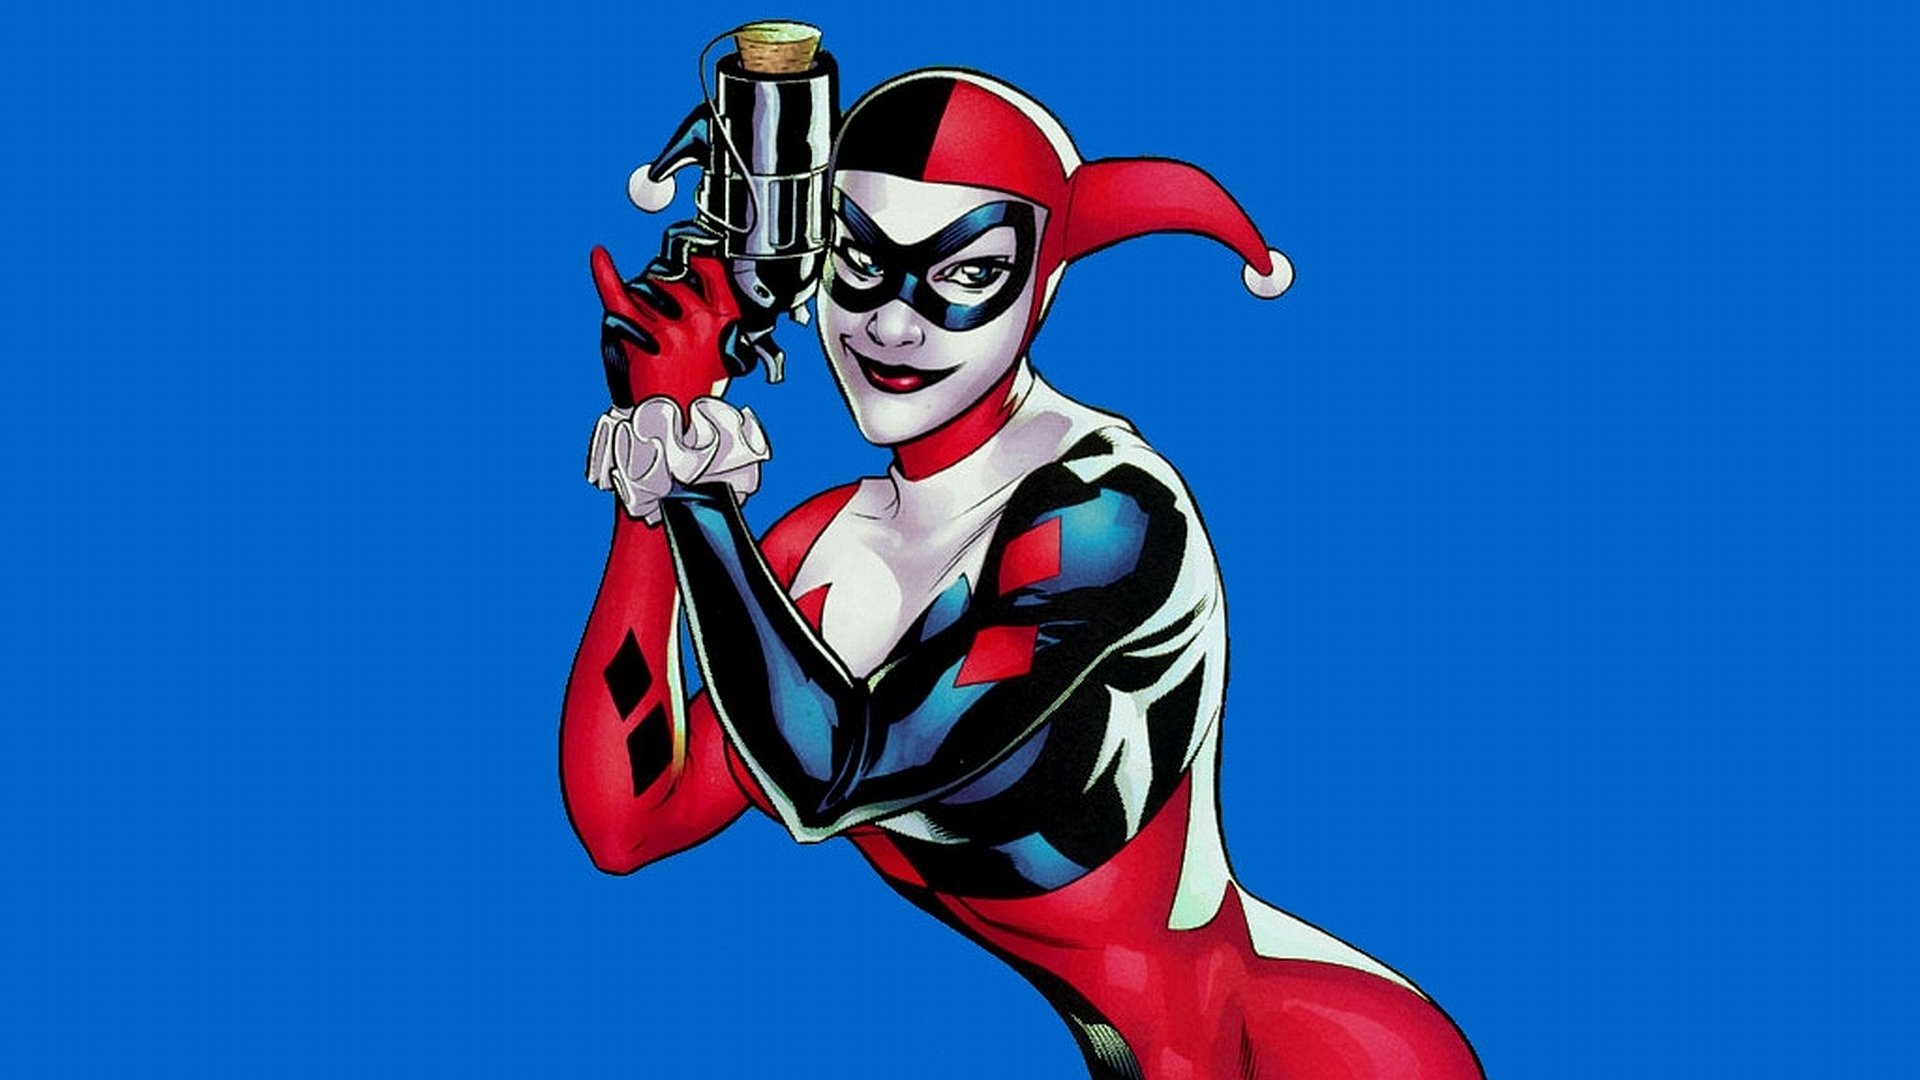 Download full hd 1080p Harley Quinn PC background ID:240943 for free